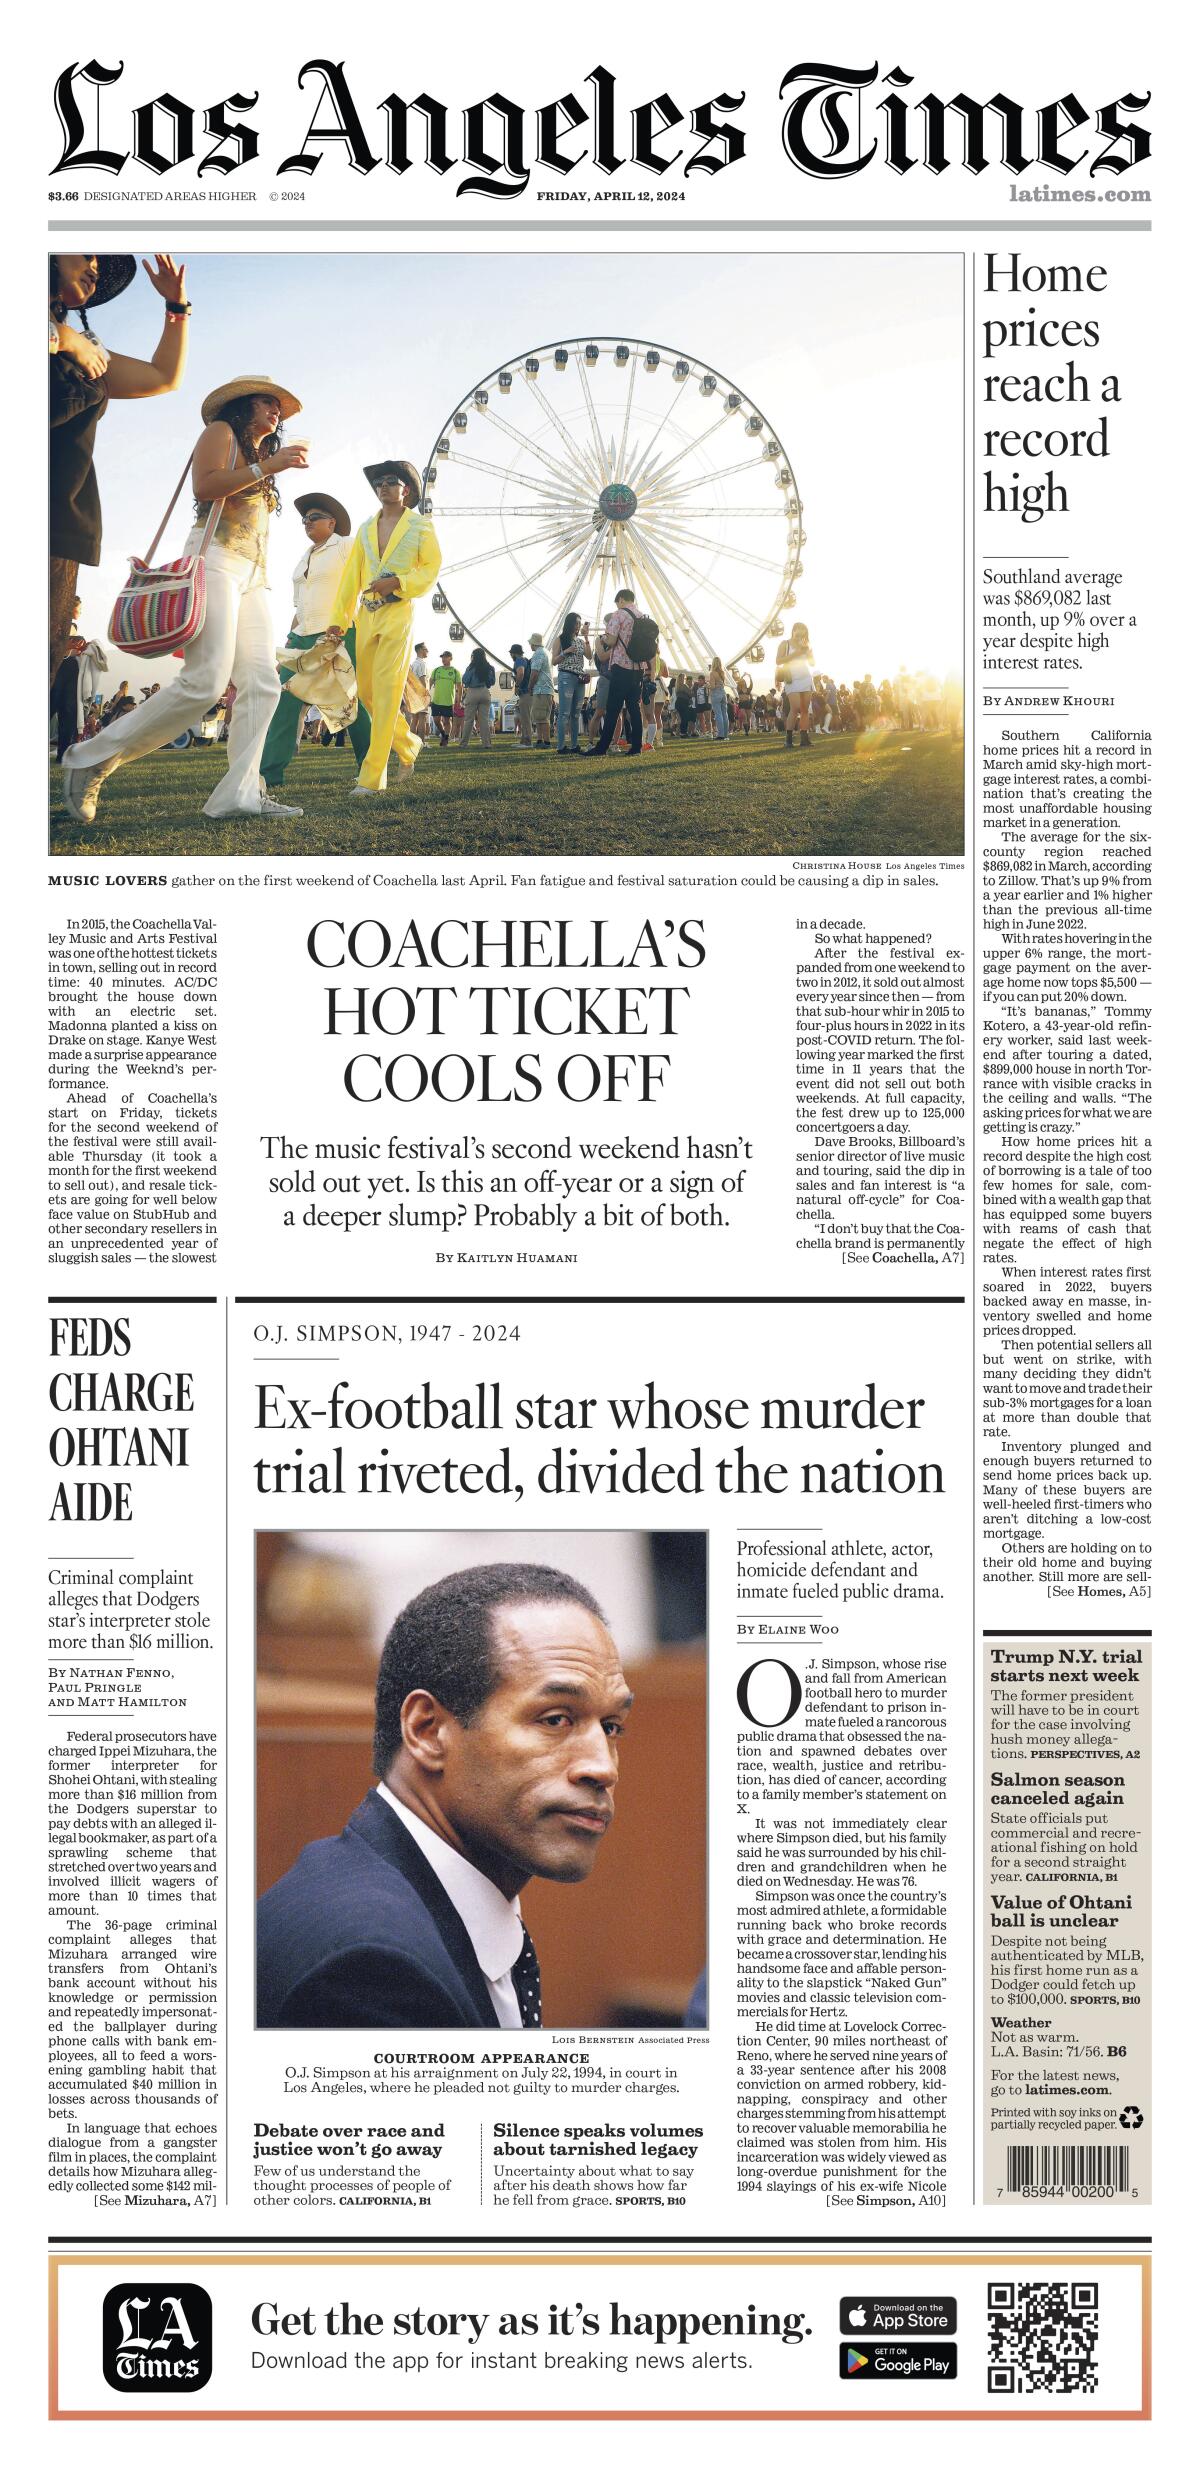 Los Angeles Times front page A1 for Friday, April 12, 2024, with OJ Simpson obituary.